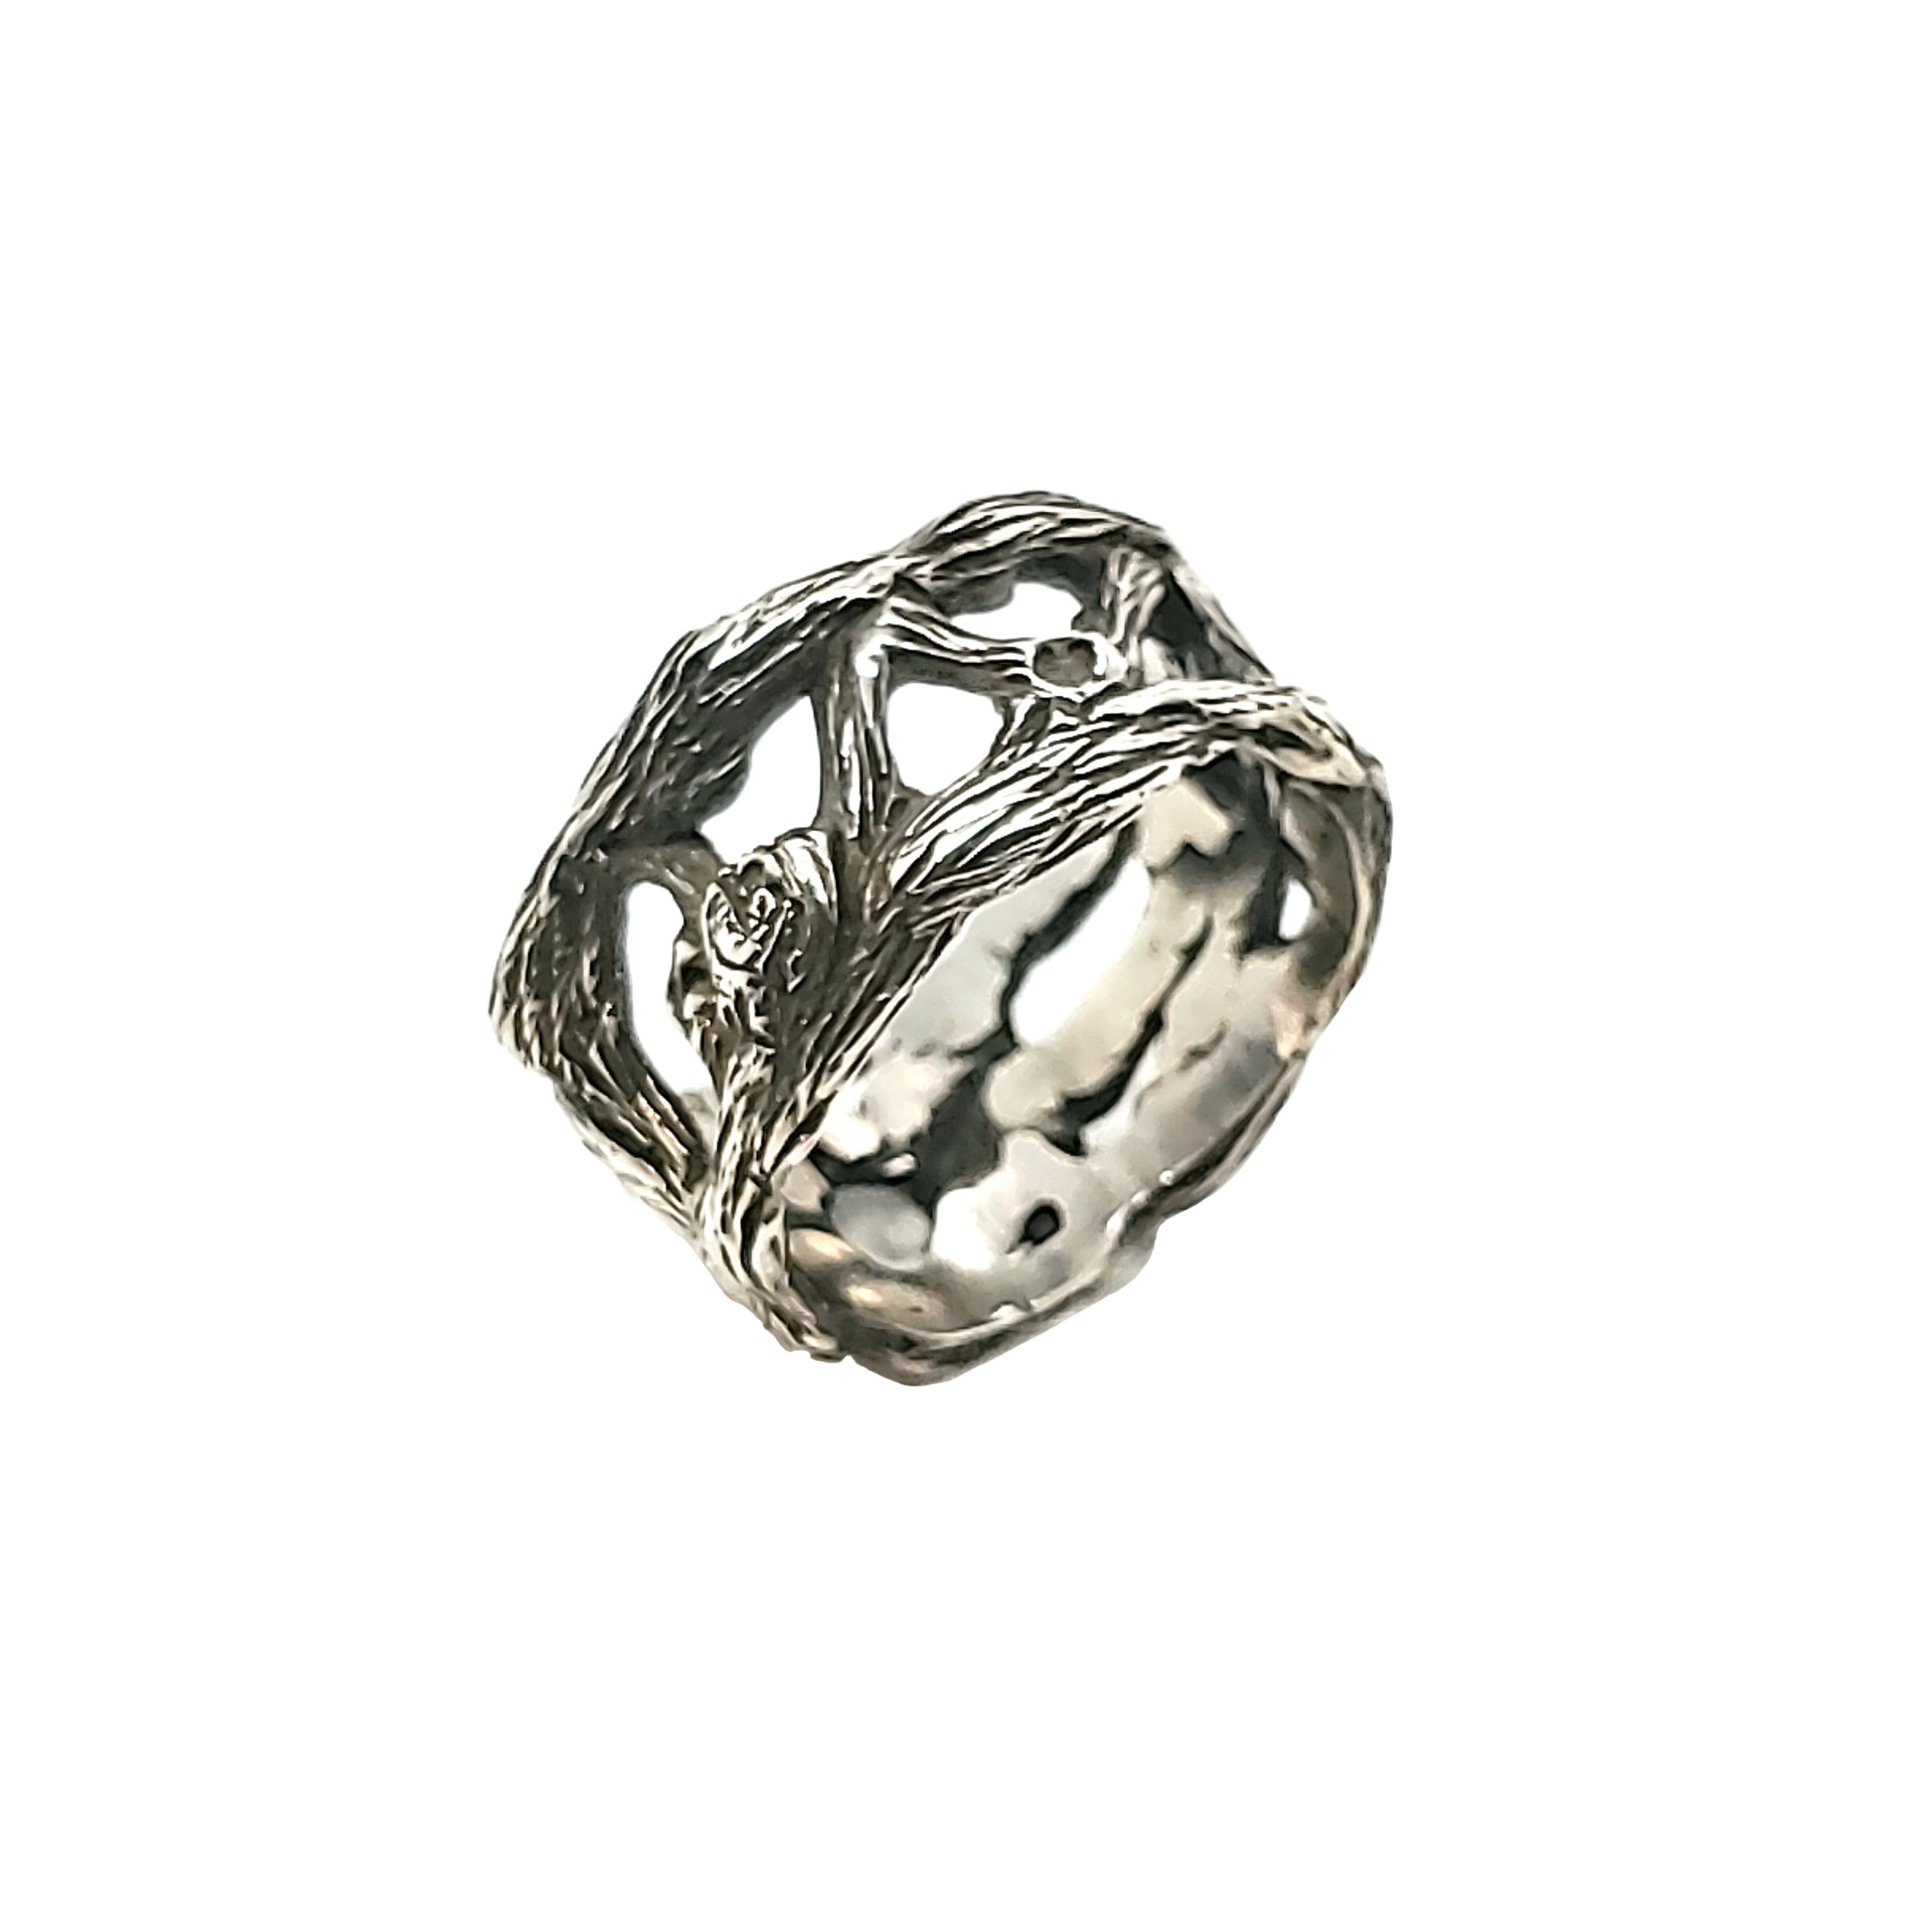 Custom Made Sterling Silver "Vine" Collection Ring